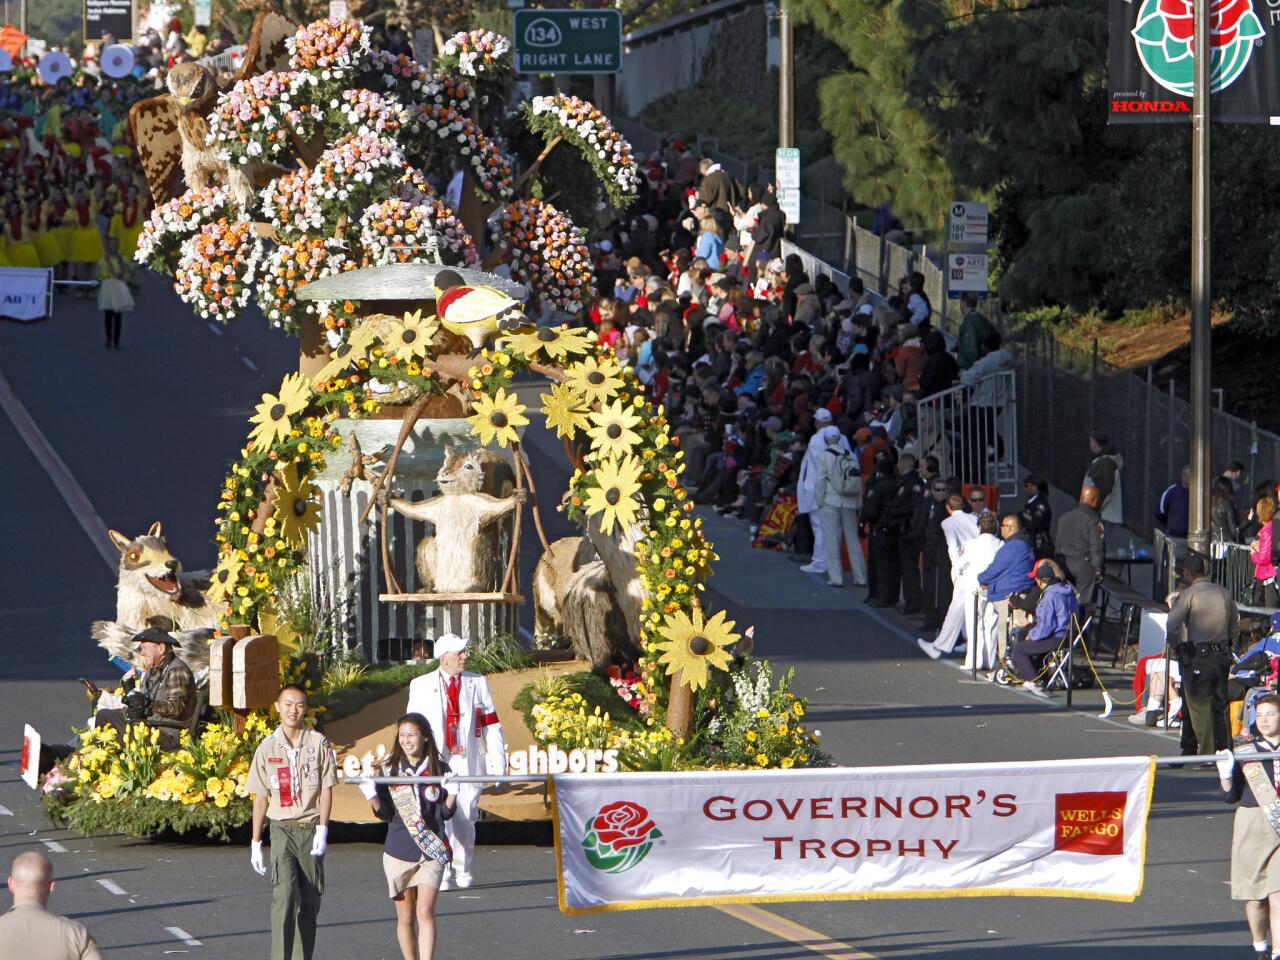 The Glendale float "Let's be neighbors," featuring Meatball the bear, won the Governor's Award for best depiction of life in California at the Rose Parade in Pasadena on Wednesday, Jan. 1, 2014.